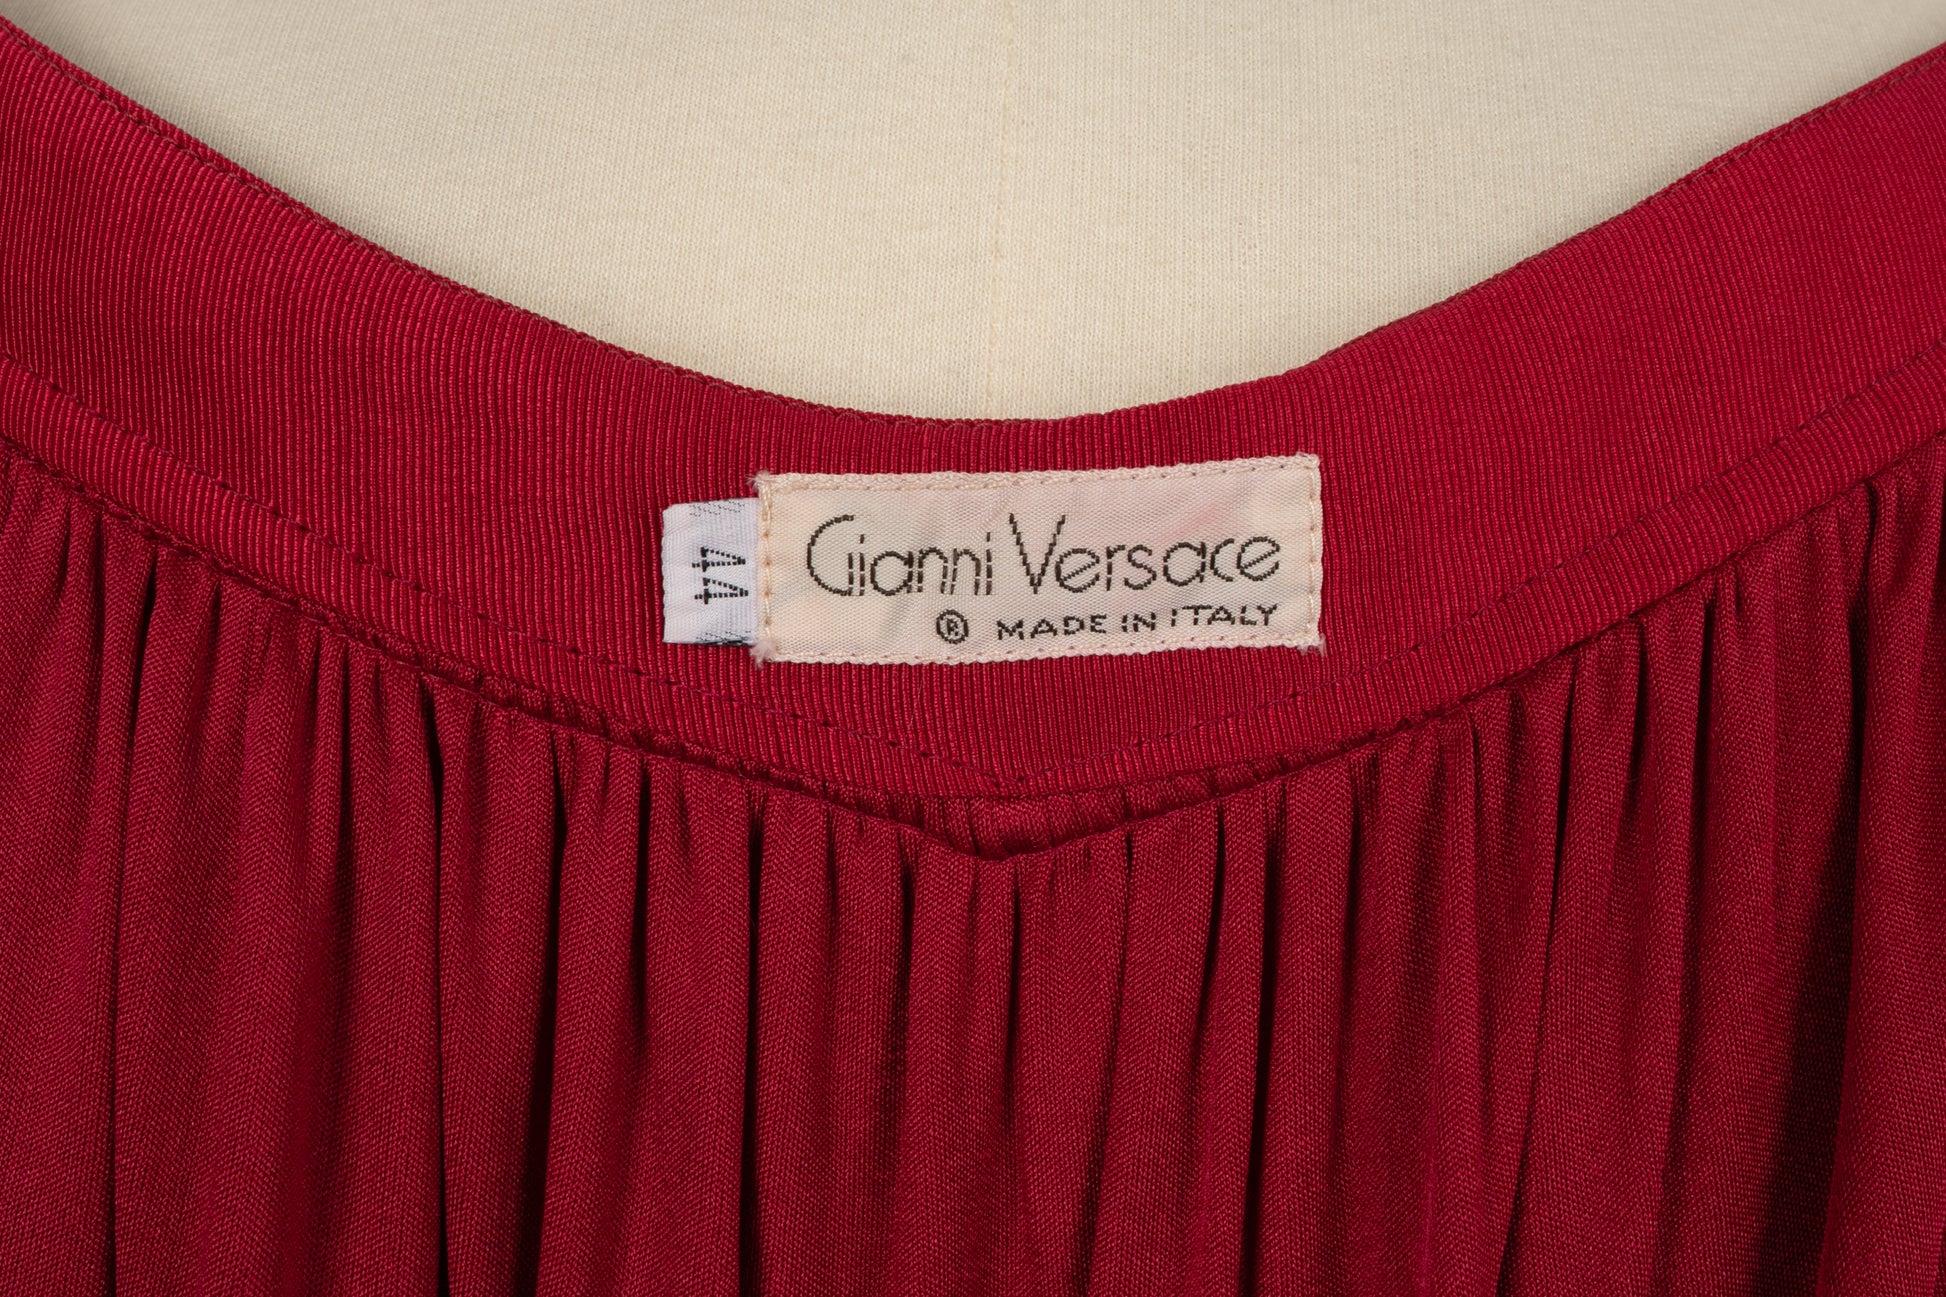 Gianni Versace Silk Pleated Dress, 1980s For Sale 4